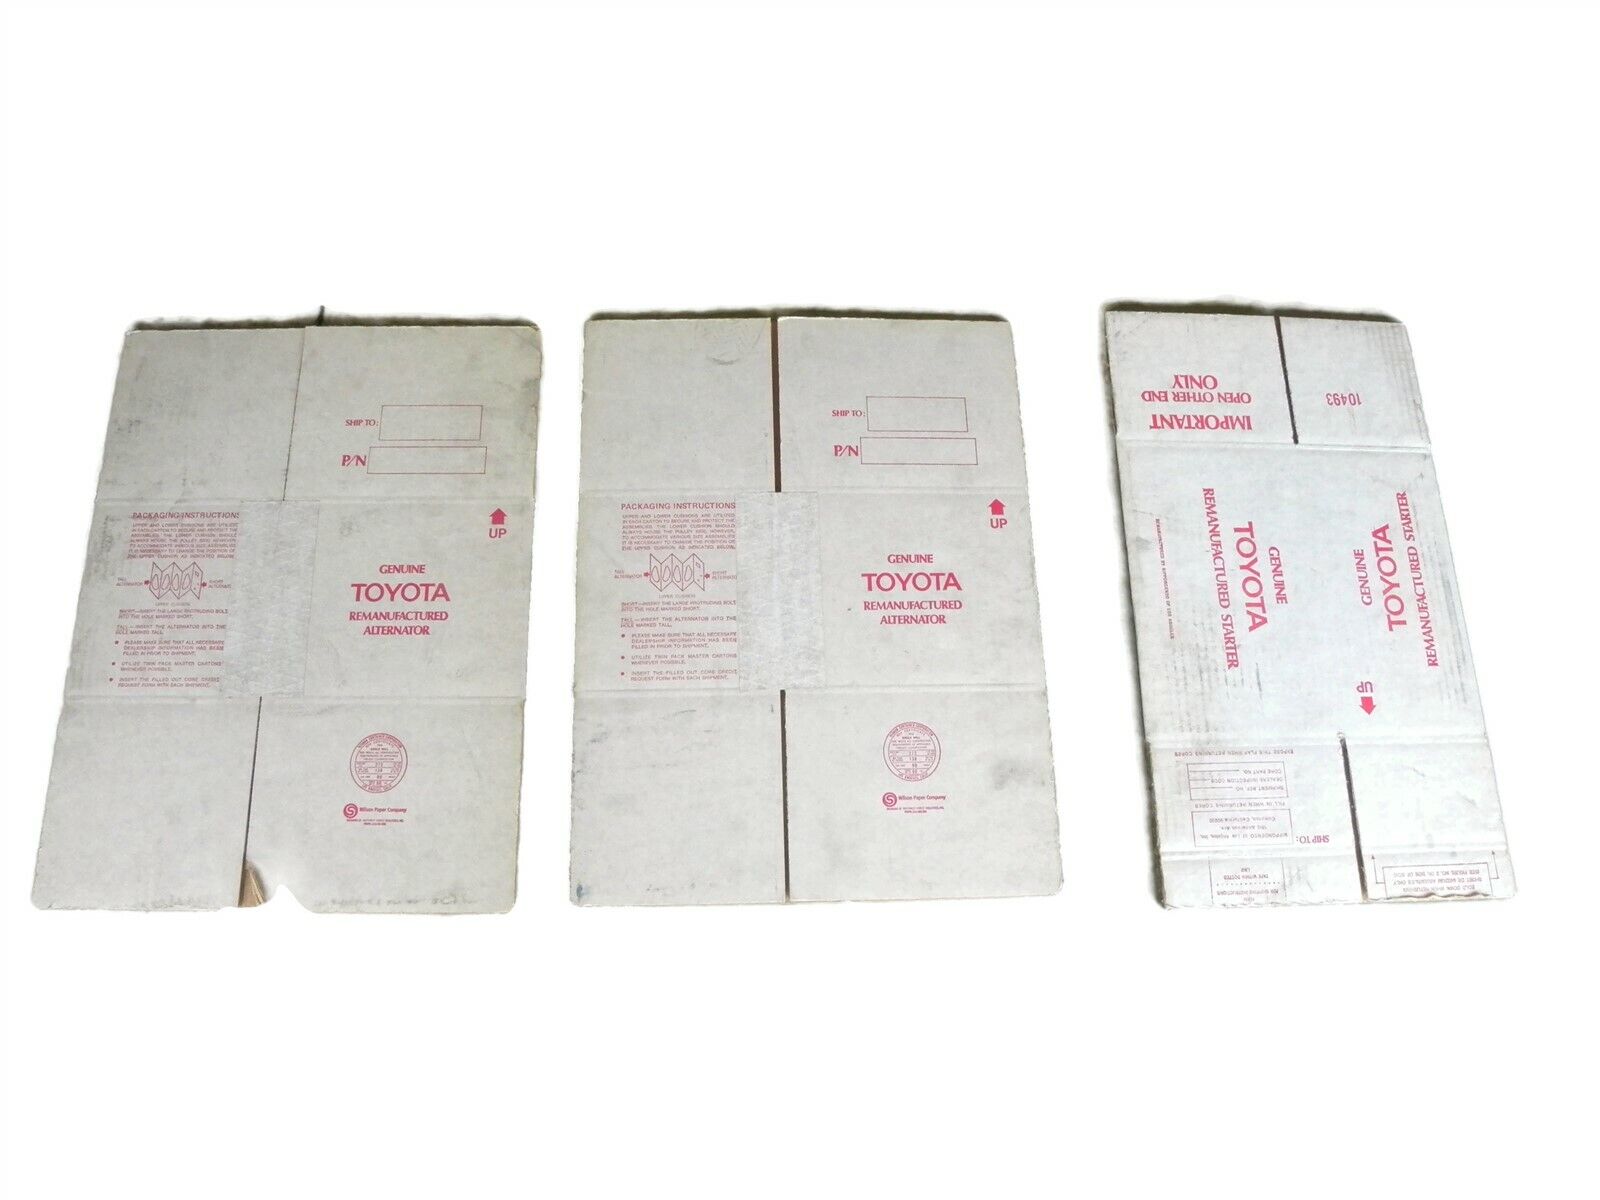 VINTAGE 1970S-80S TOYOTA DEALERSHIP CARDBOARD PARTS BOXES UNUSED SOLD AS A LOT